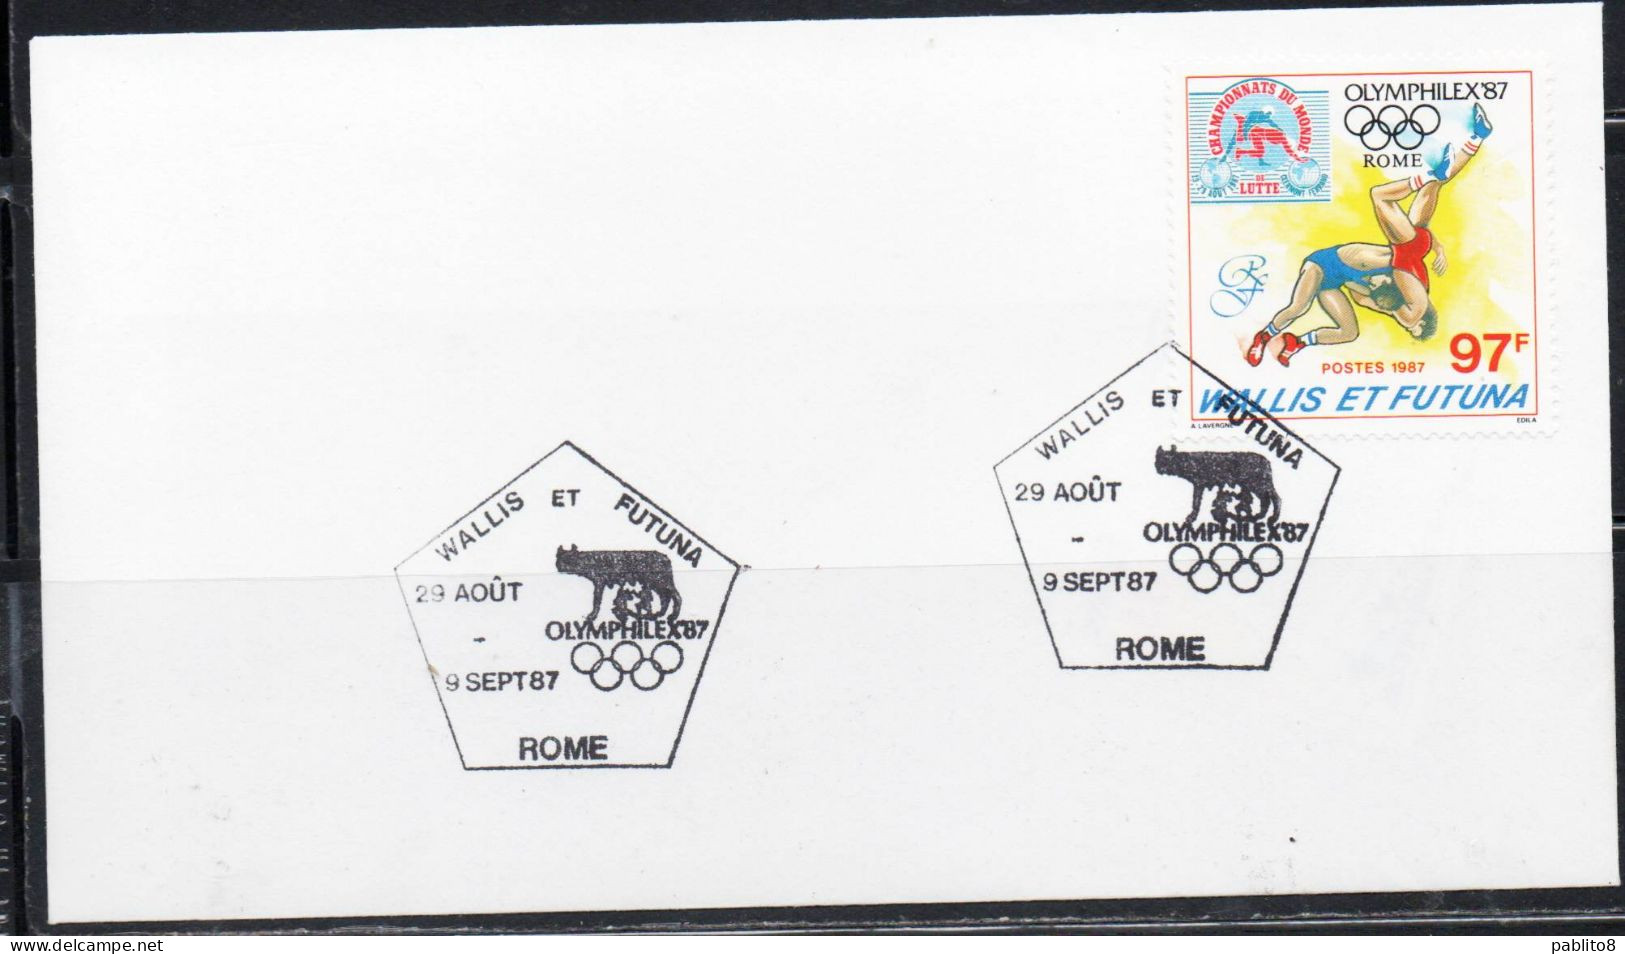 WALLIS AND FUTUNA ISLANDS 1987 WORLD WRESTLING CHAMPIONSHIPS OLYMPHILEX87 ROME 97fr COVER LETTER LETTRE - Usados